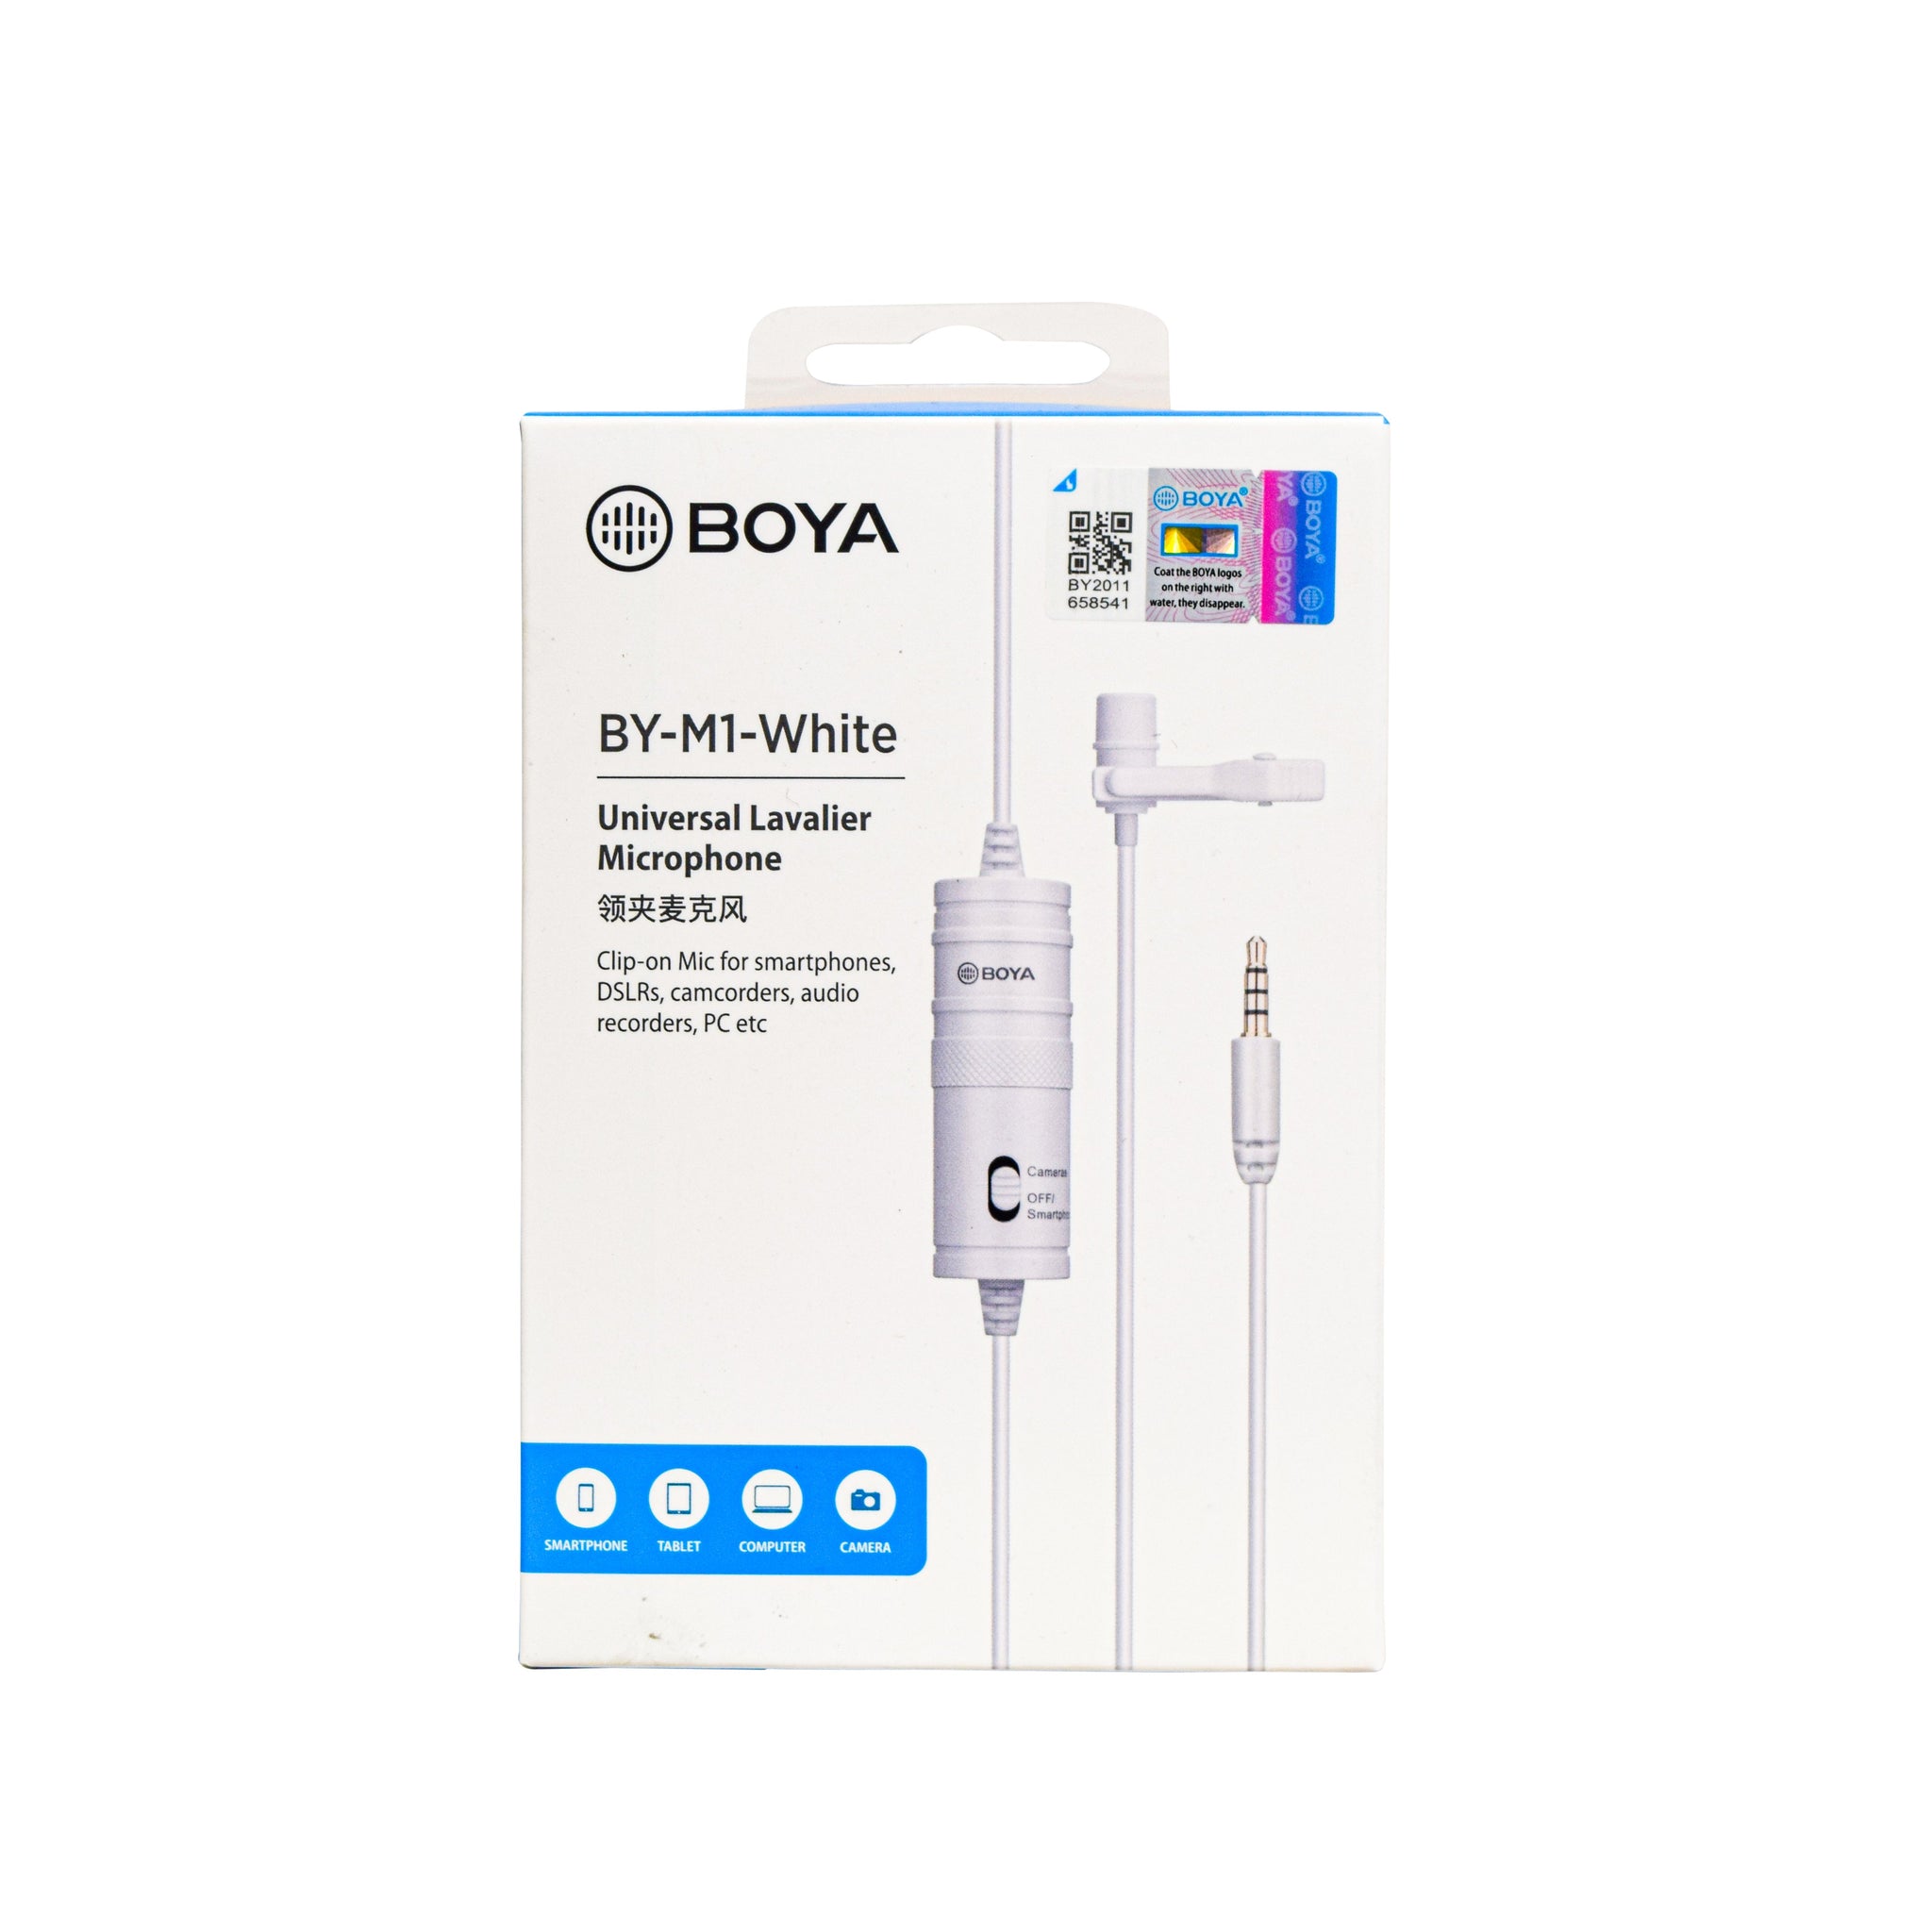 BOYA BY-M1 white with photron mount ph100 Omnidirectional Lavalier Condenser Microphone